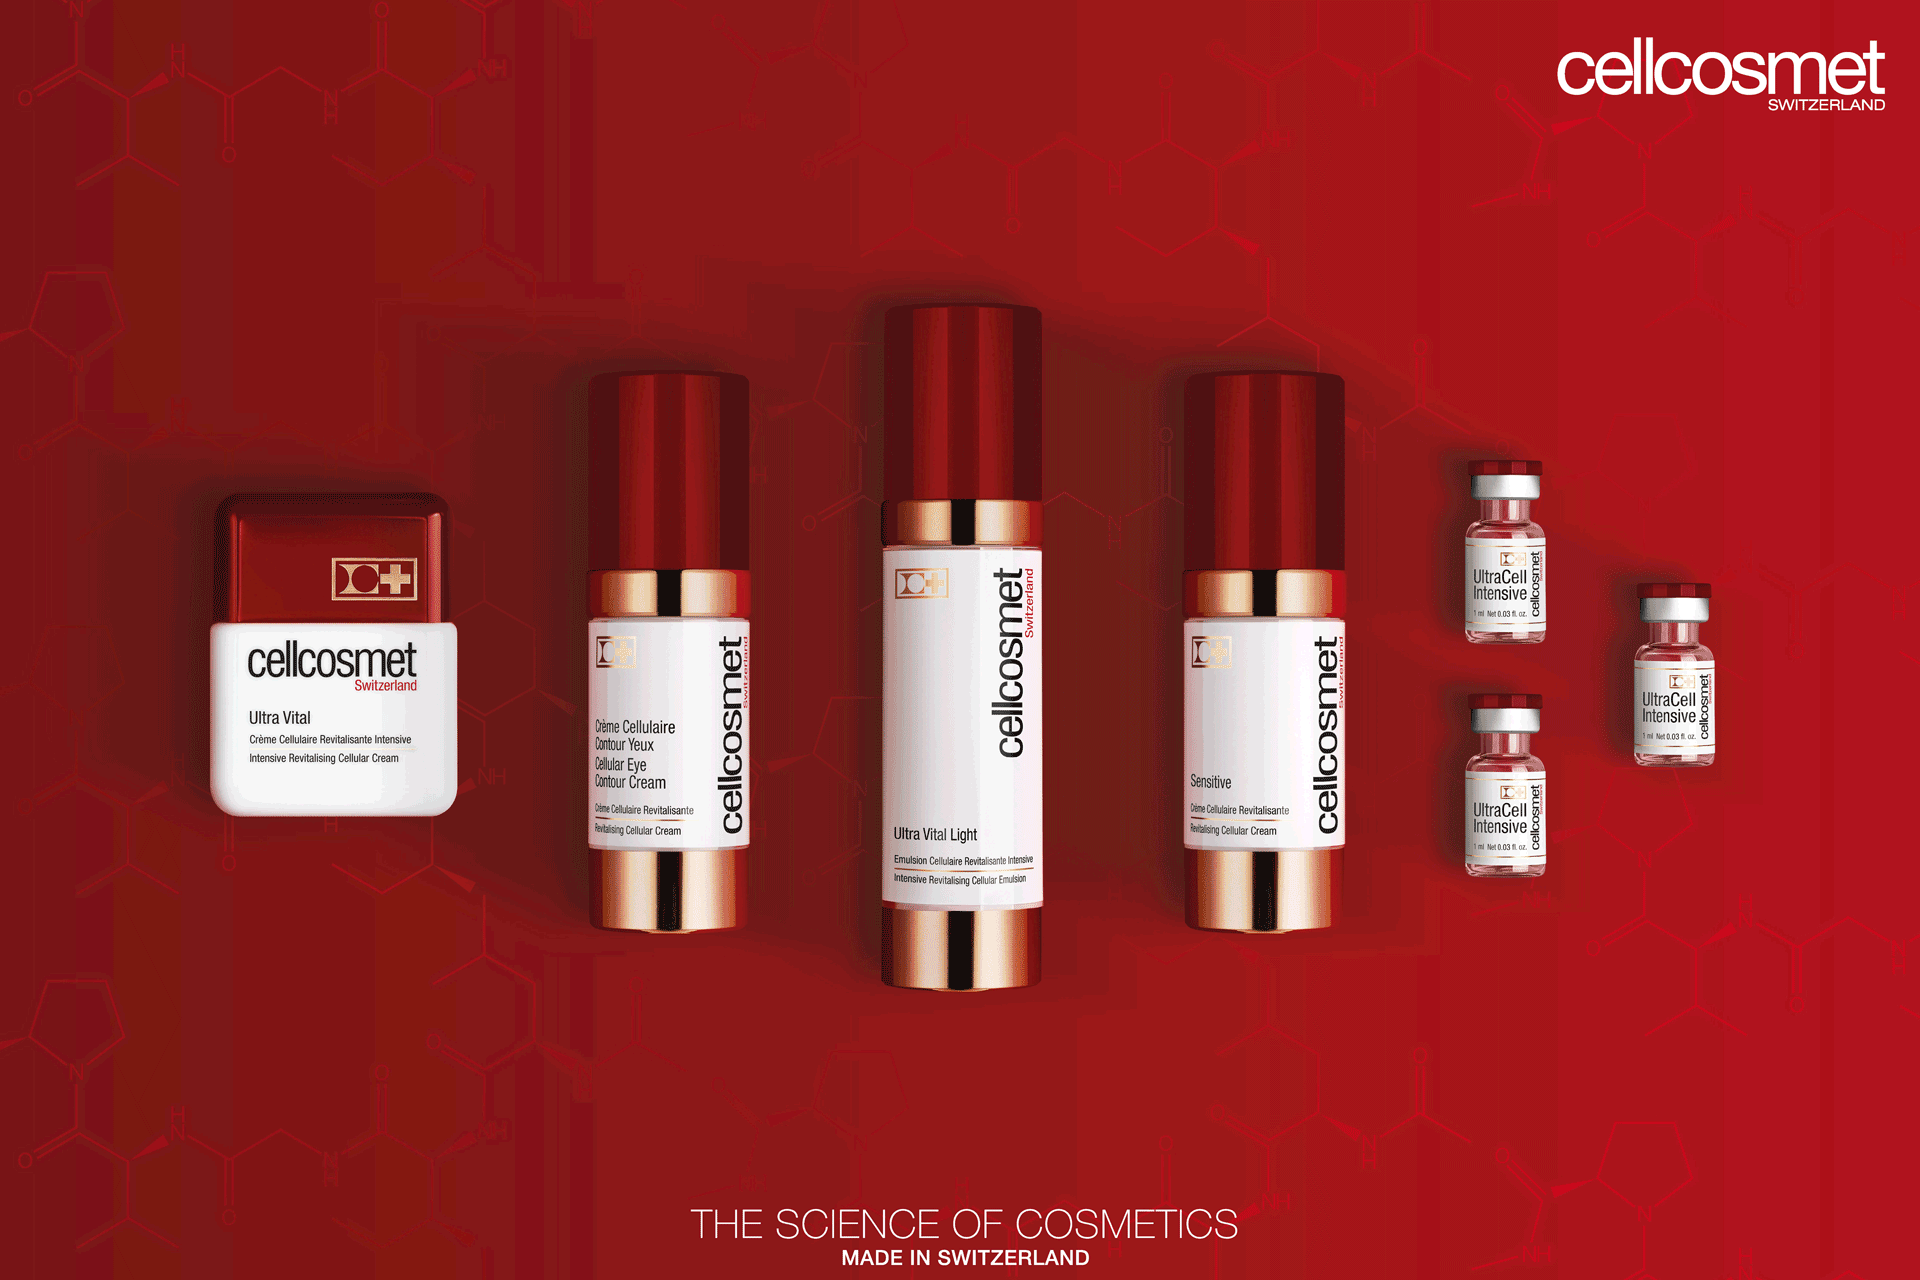 Cellcosmet products